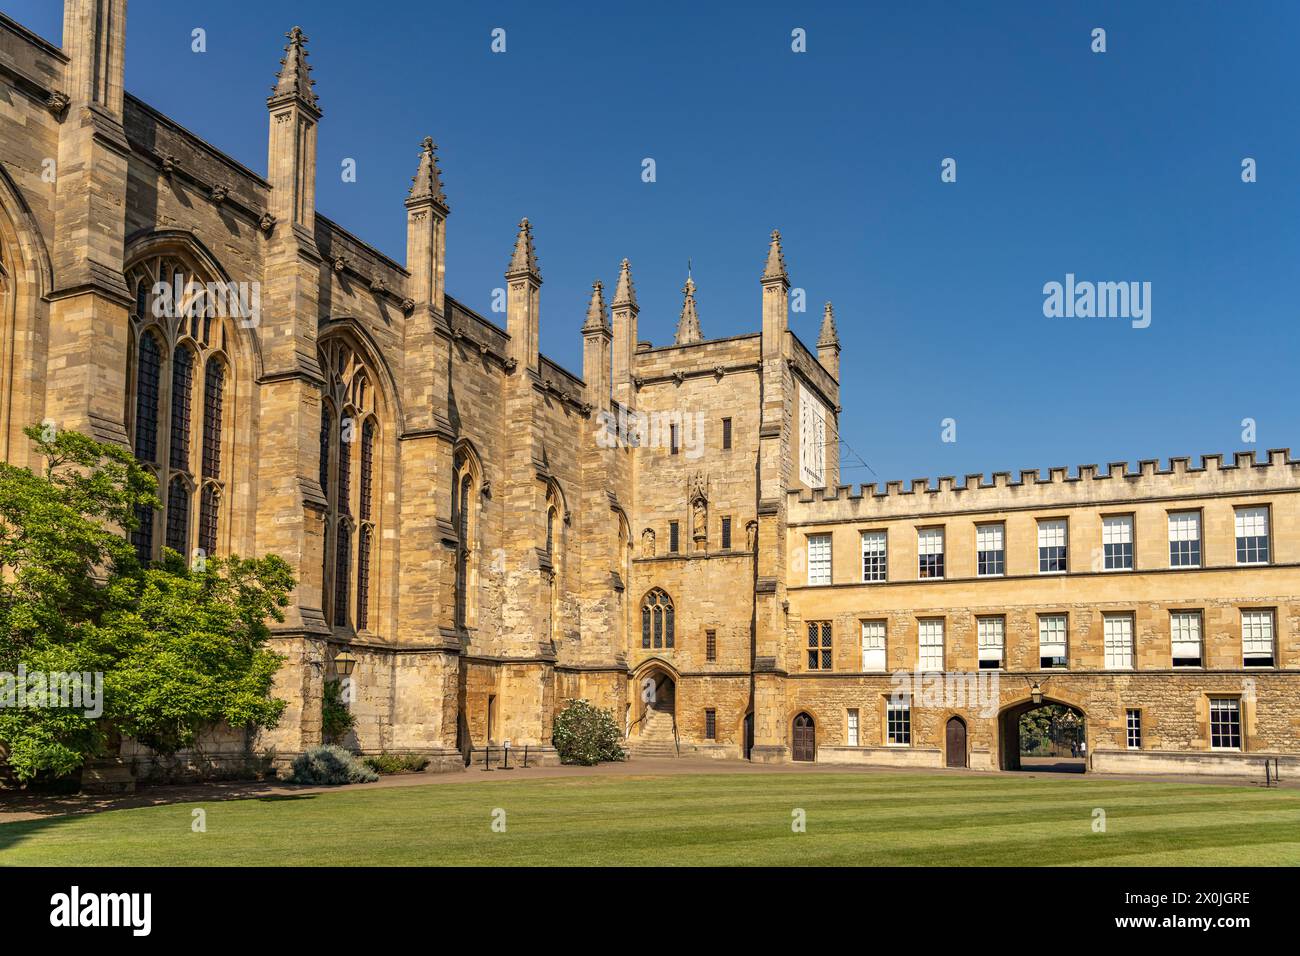 The New College, University of Oxford, Oxfordshire, England, Great Britain, Europe Stock Photo